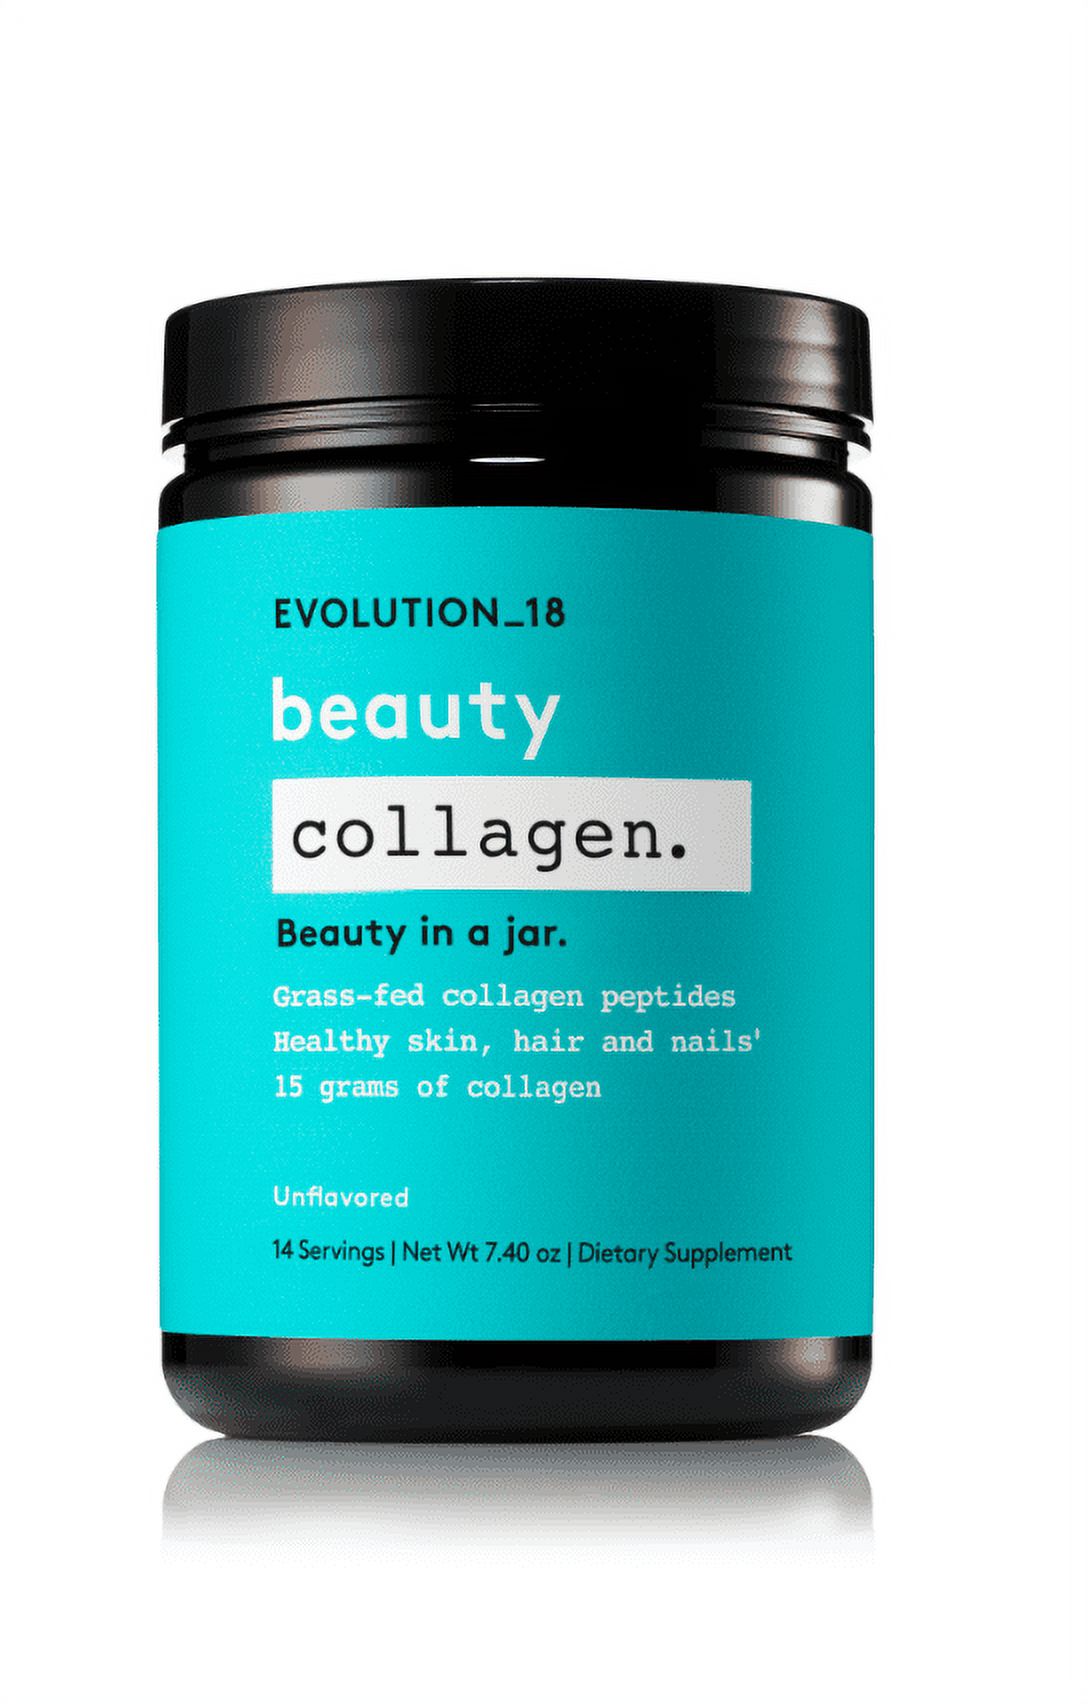 EVOLUTION_18 Collagen Peptide and Protein Powder, Unflavored, 14 Serving - image 1 of 8